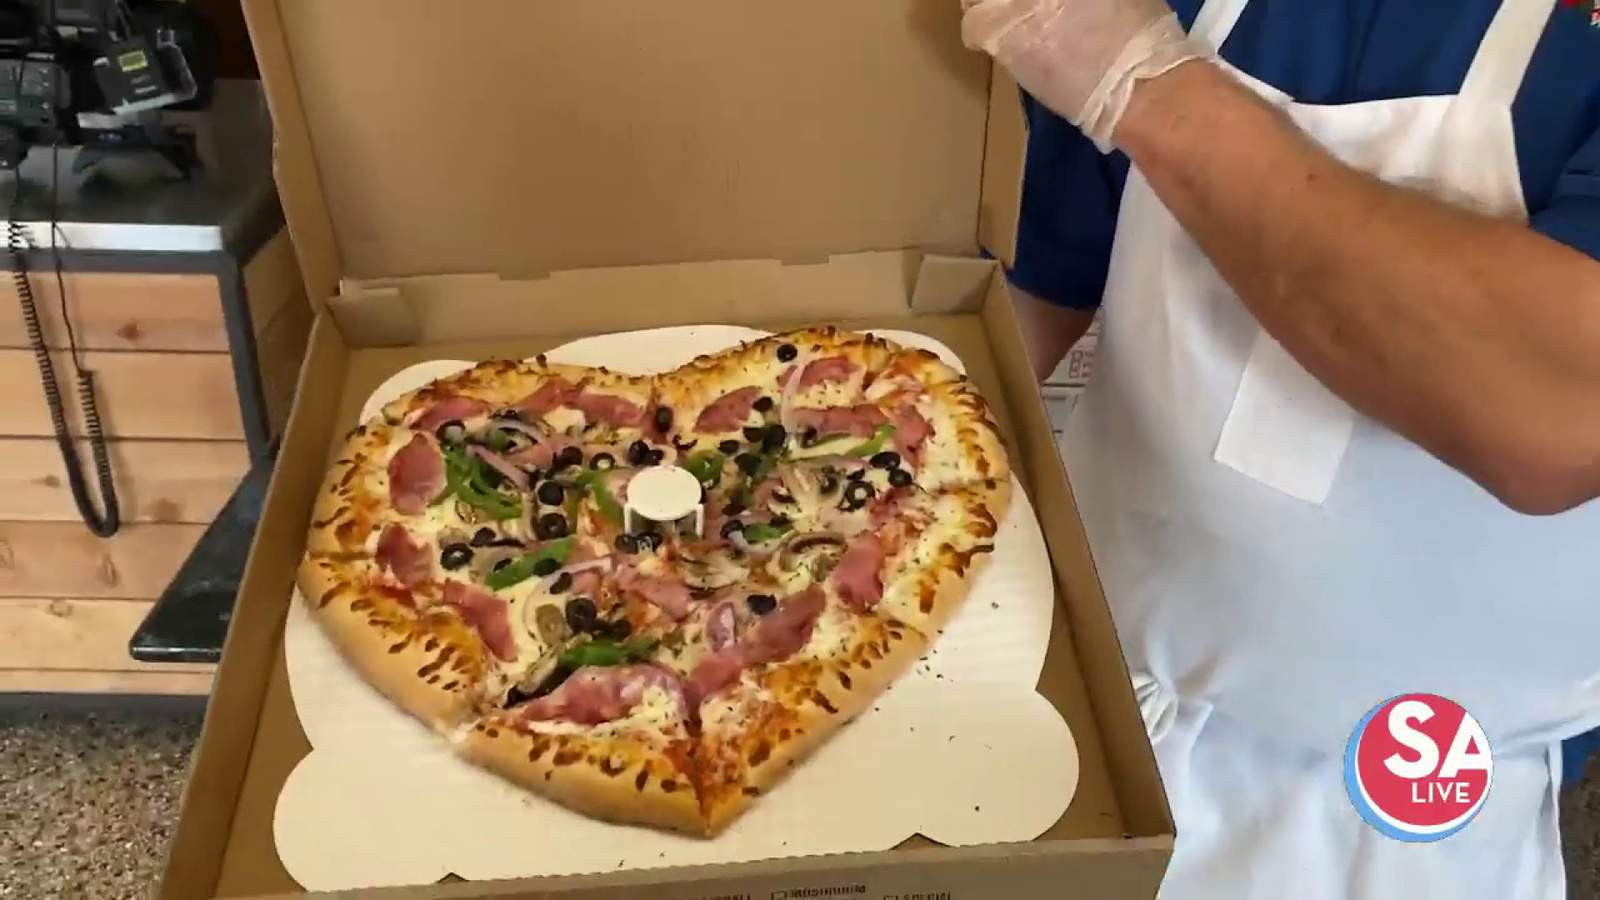 Send love with heart-shaped pizza this Valentine’s Day